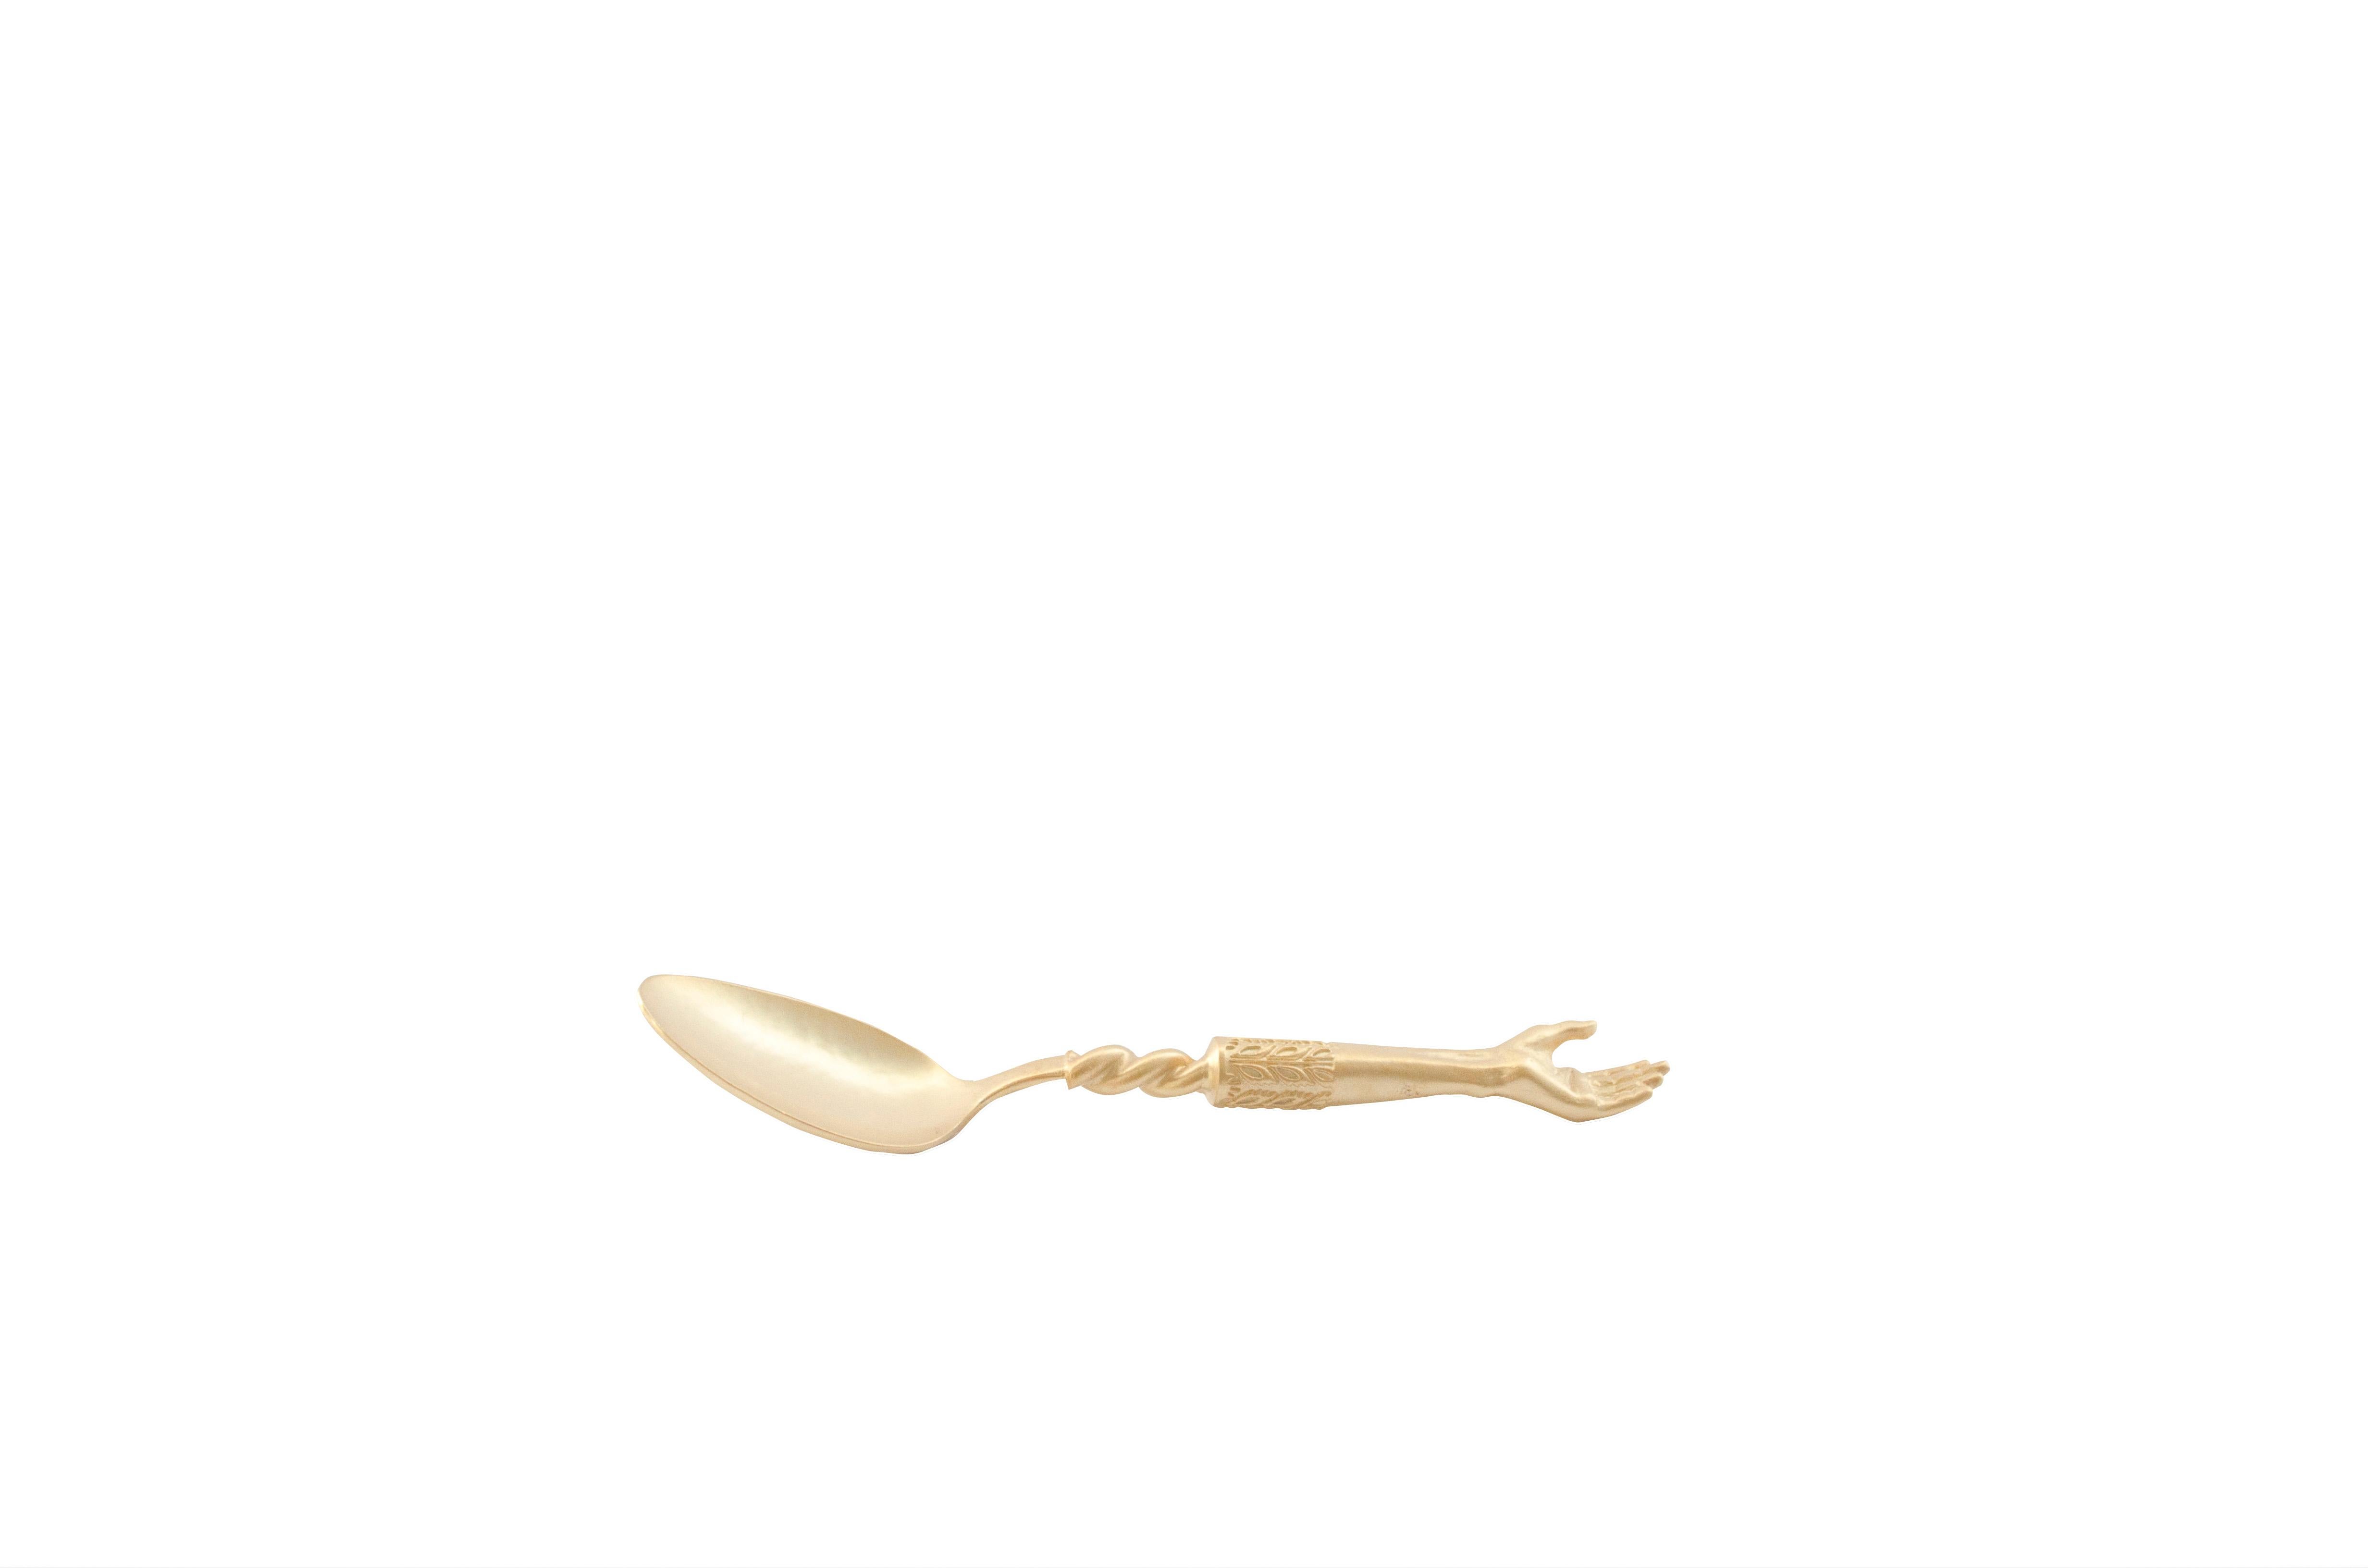 Carved Golden Plated Hand Tea Spoon Set of Two Handcrafted Natalia Criado For Sale